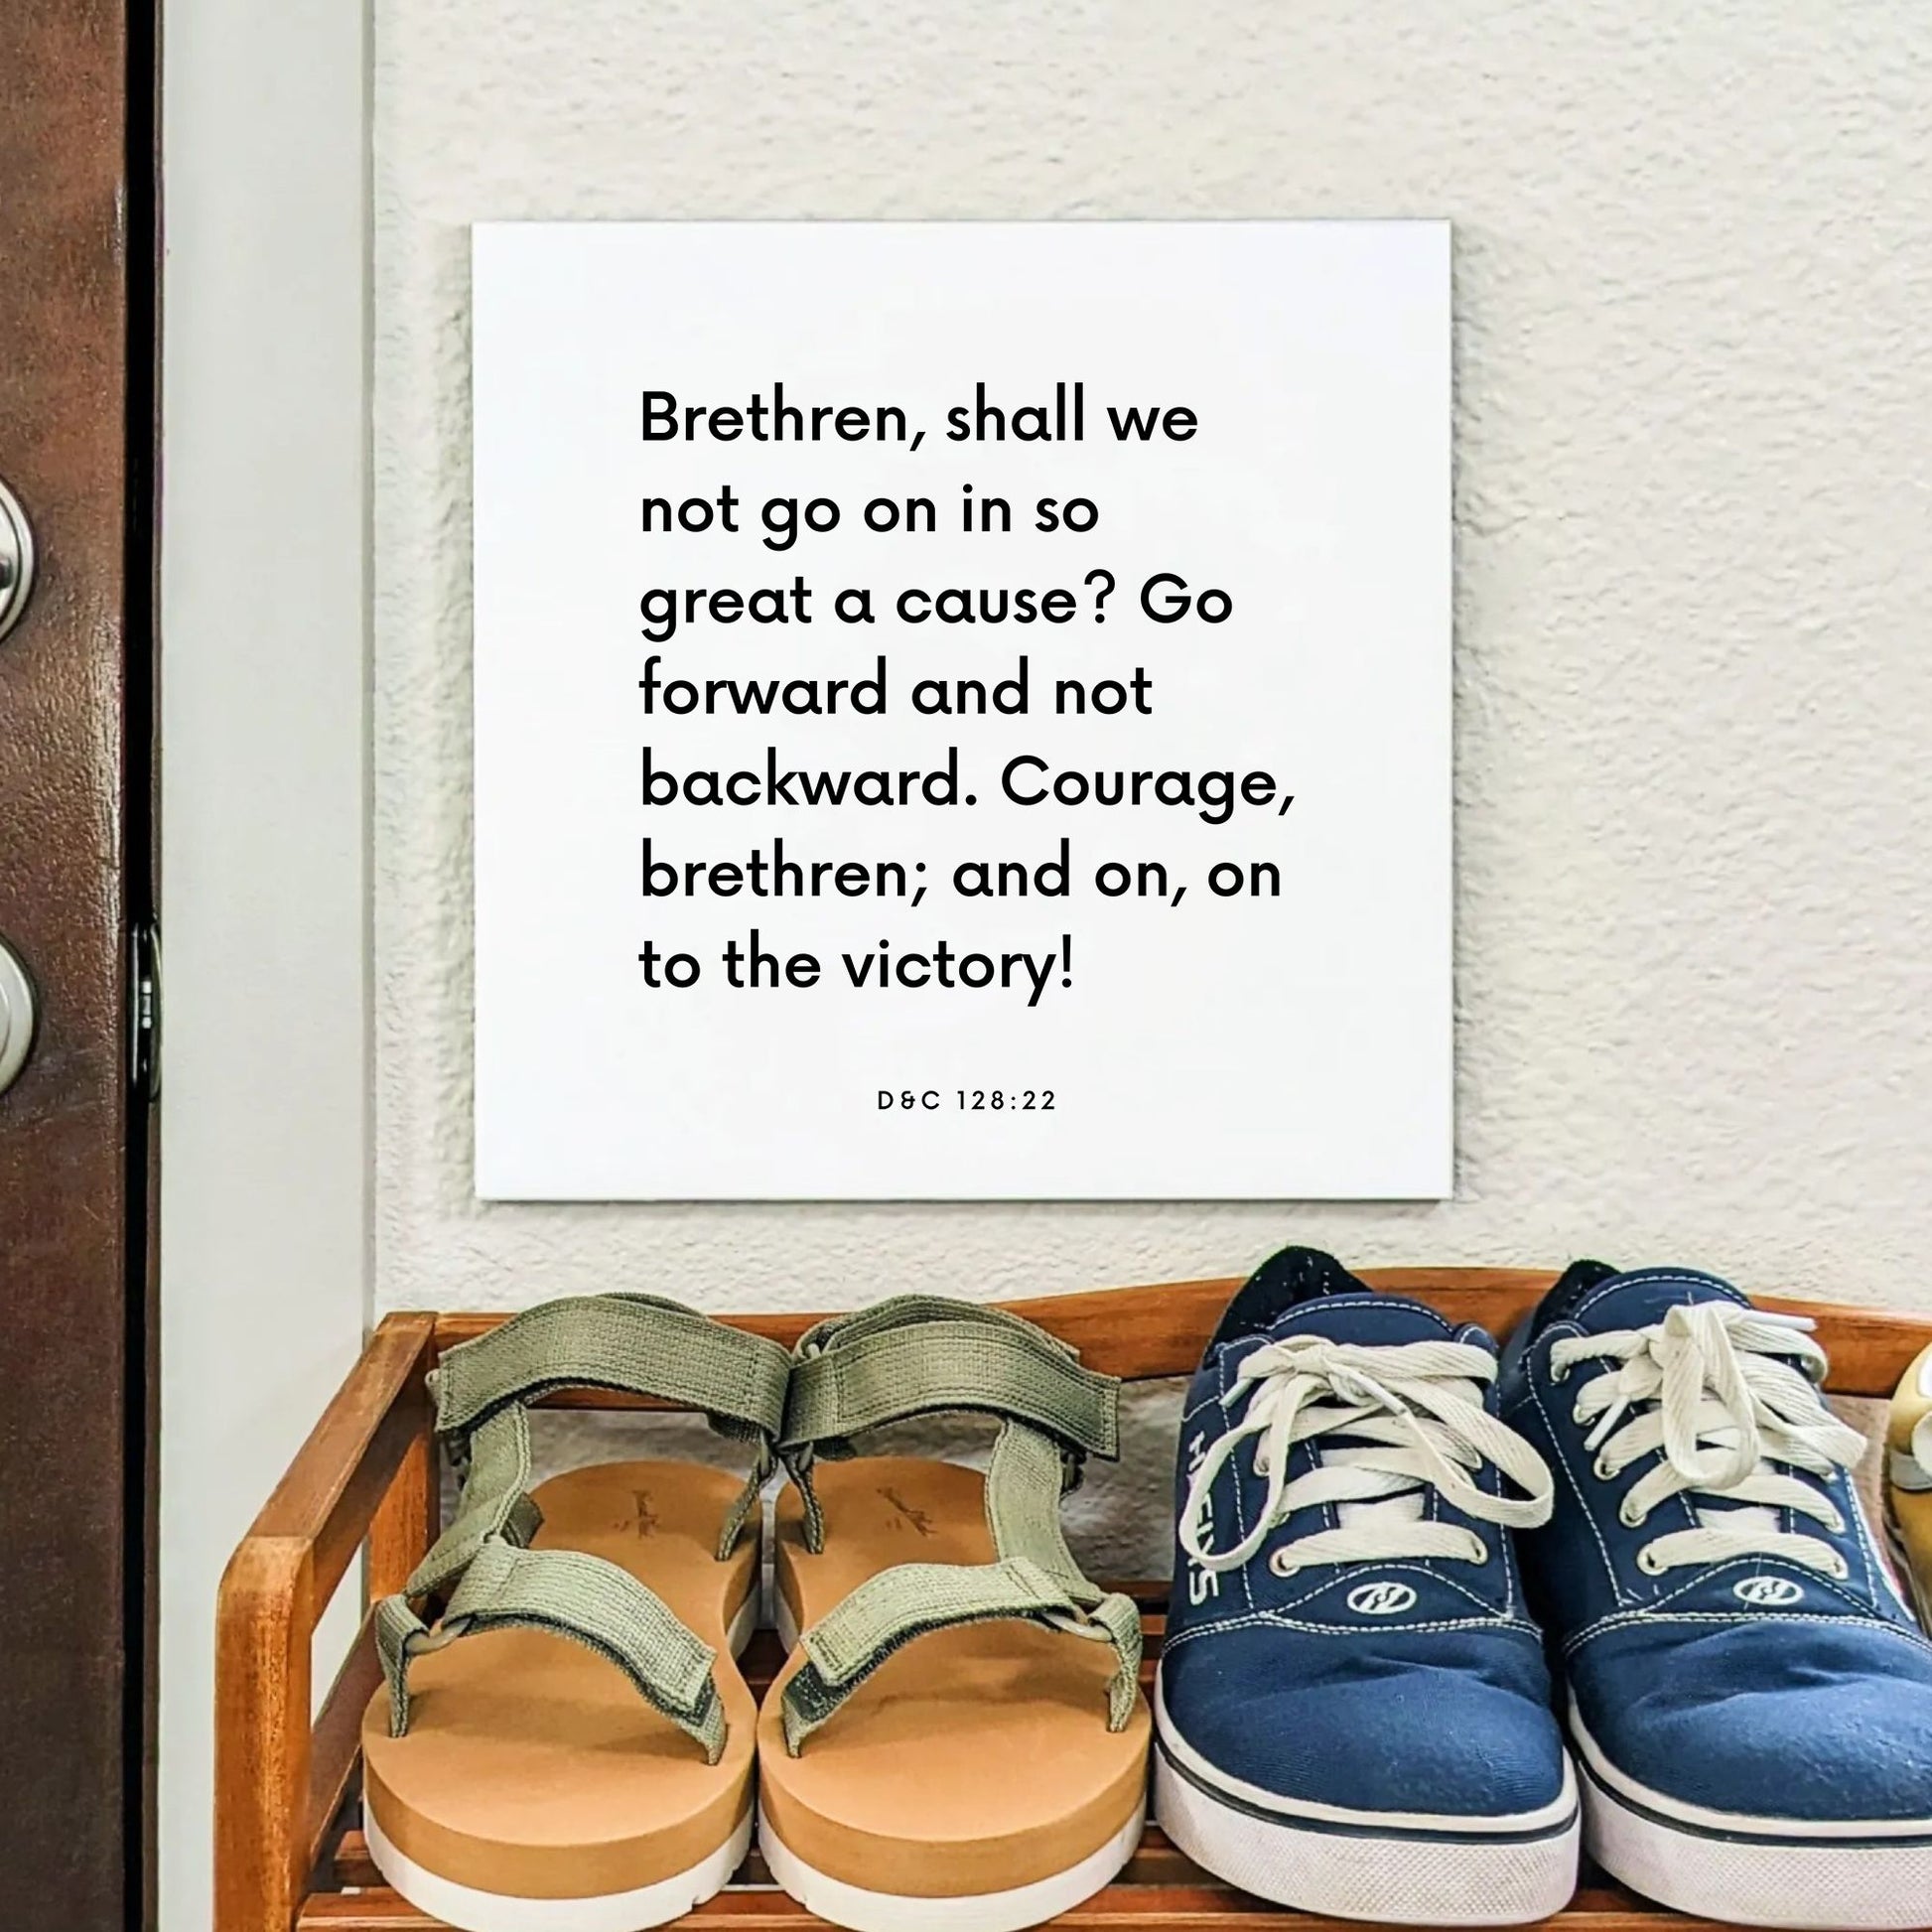 Shoes mouting of the scripture tile for D&C 128:22 - "Brethren, shall we not go on in so great a cause?"